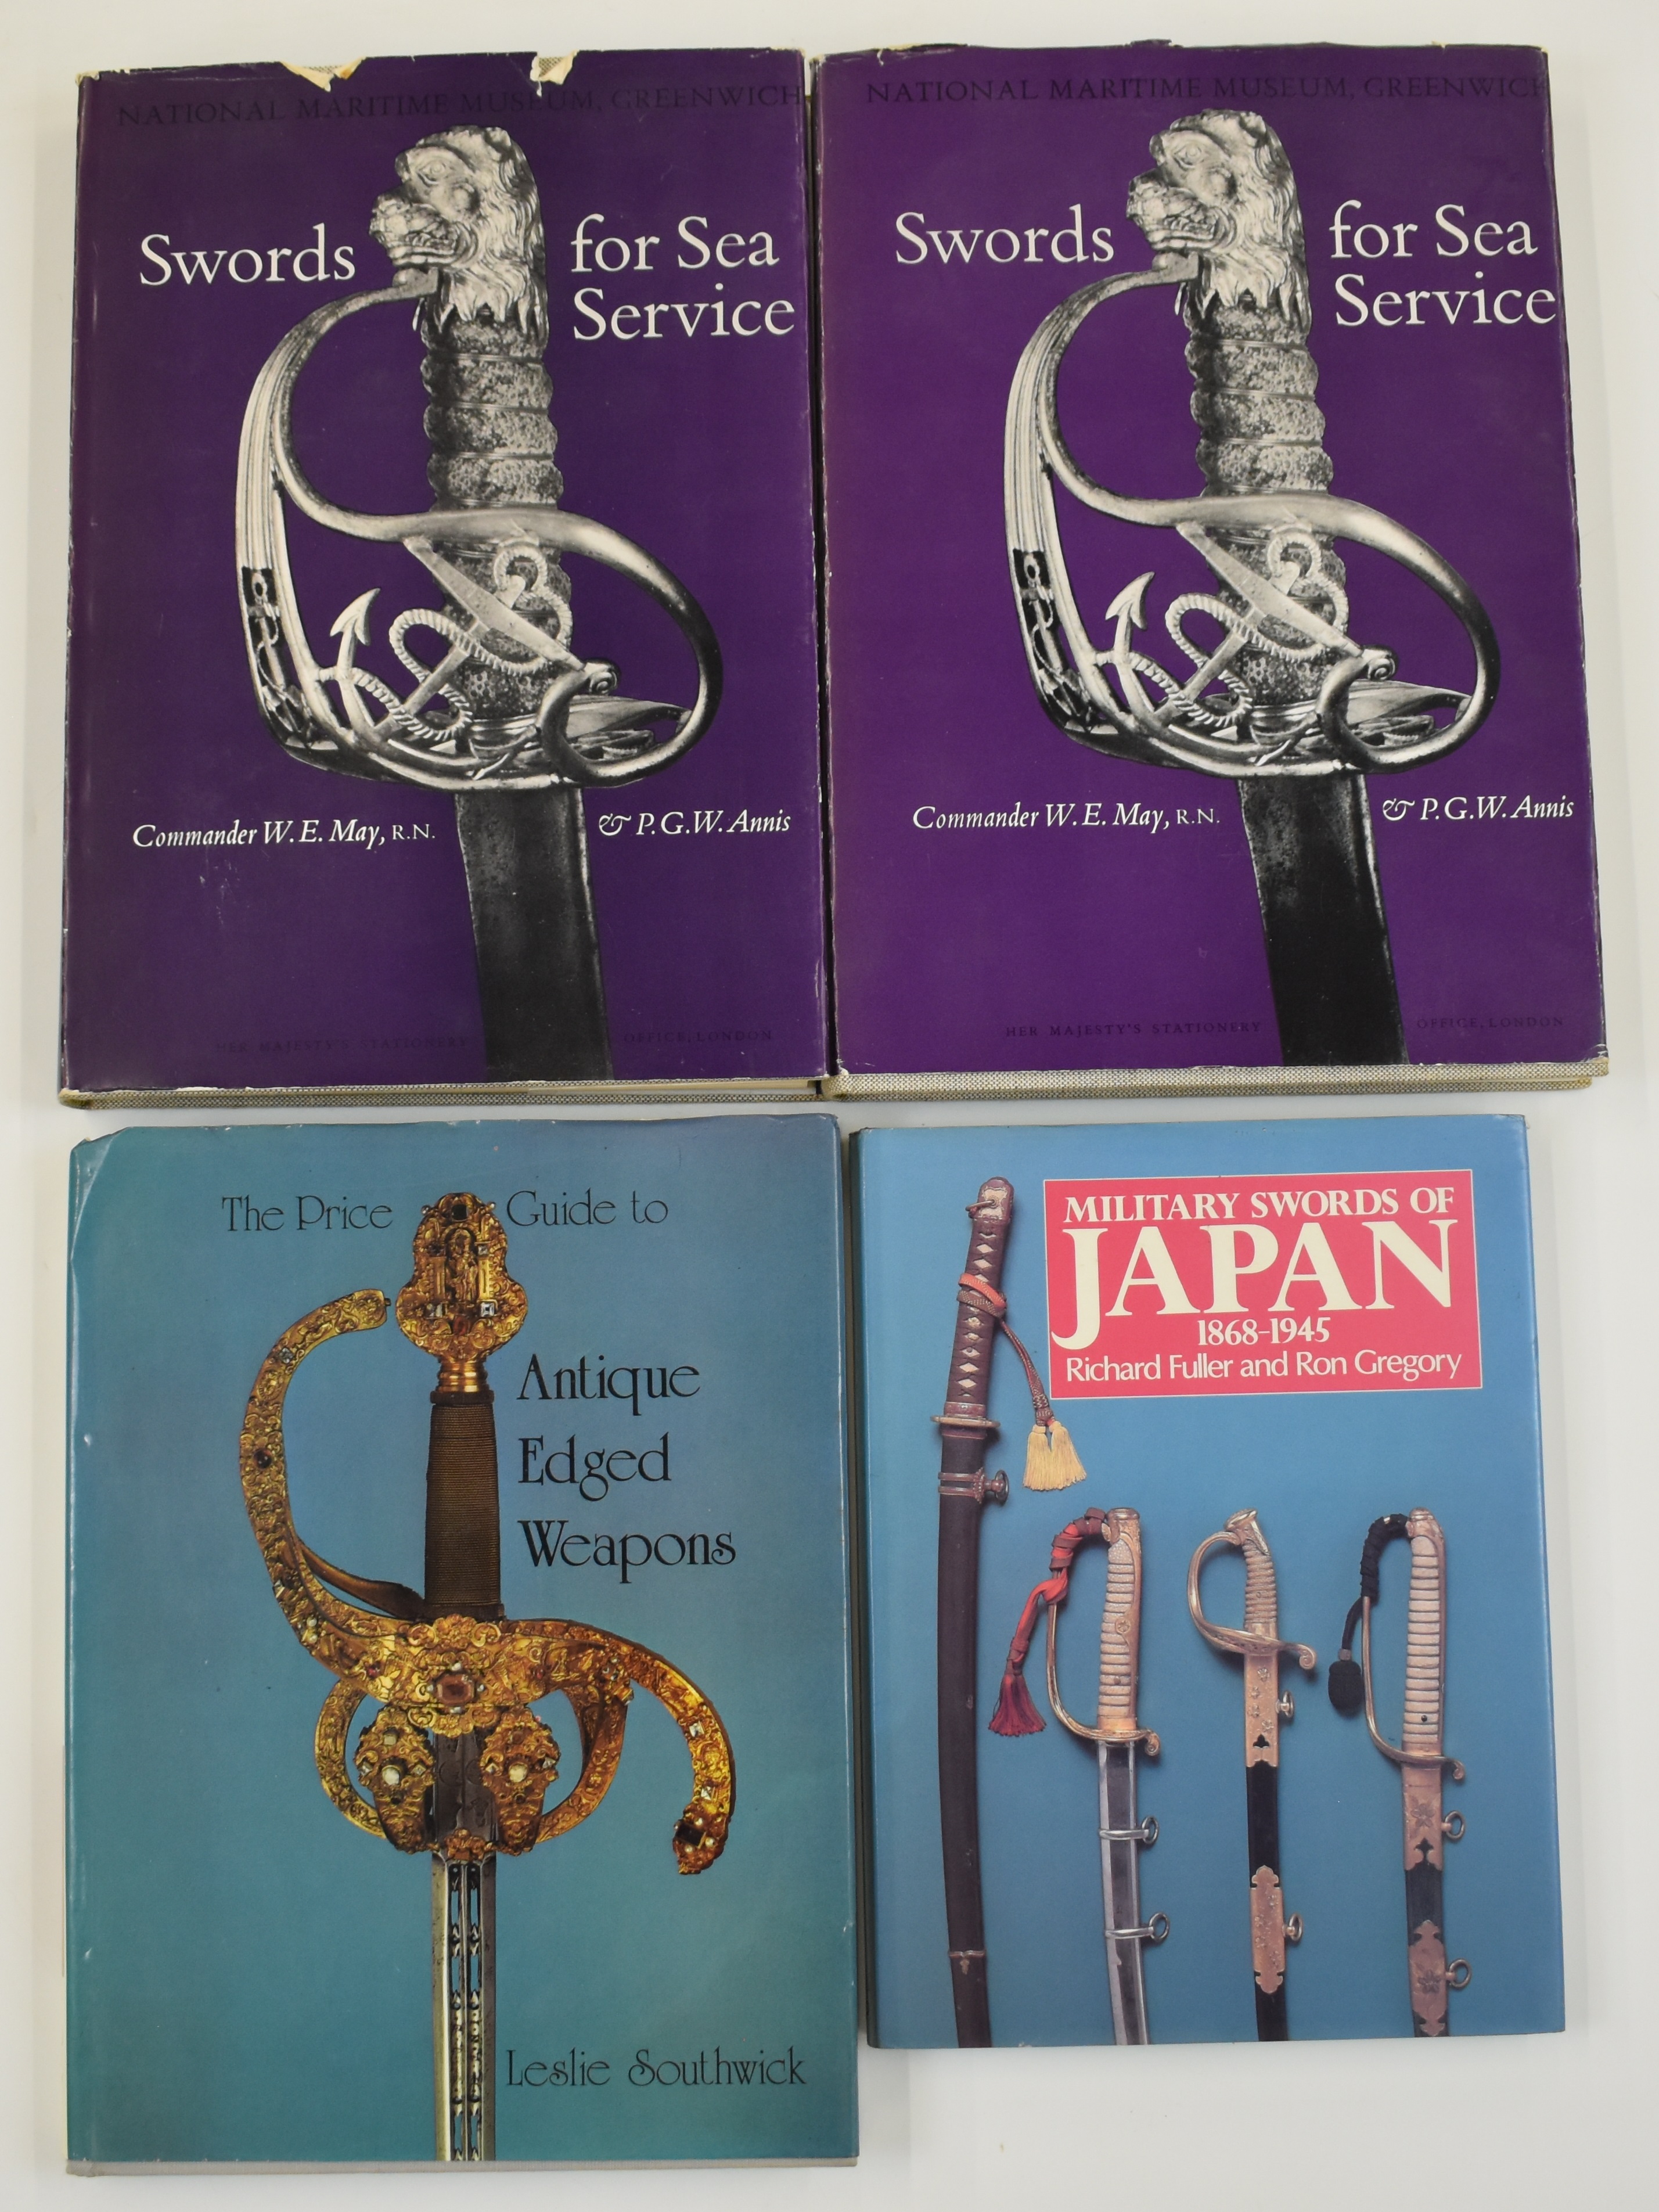 Swords for Sea Service by Commander W.E. May & P.W Annis, printed for Her Majesty's Stationery